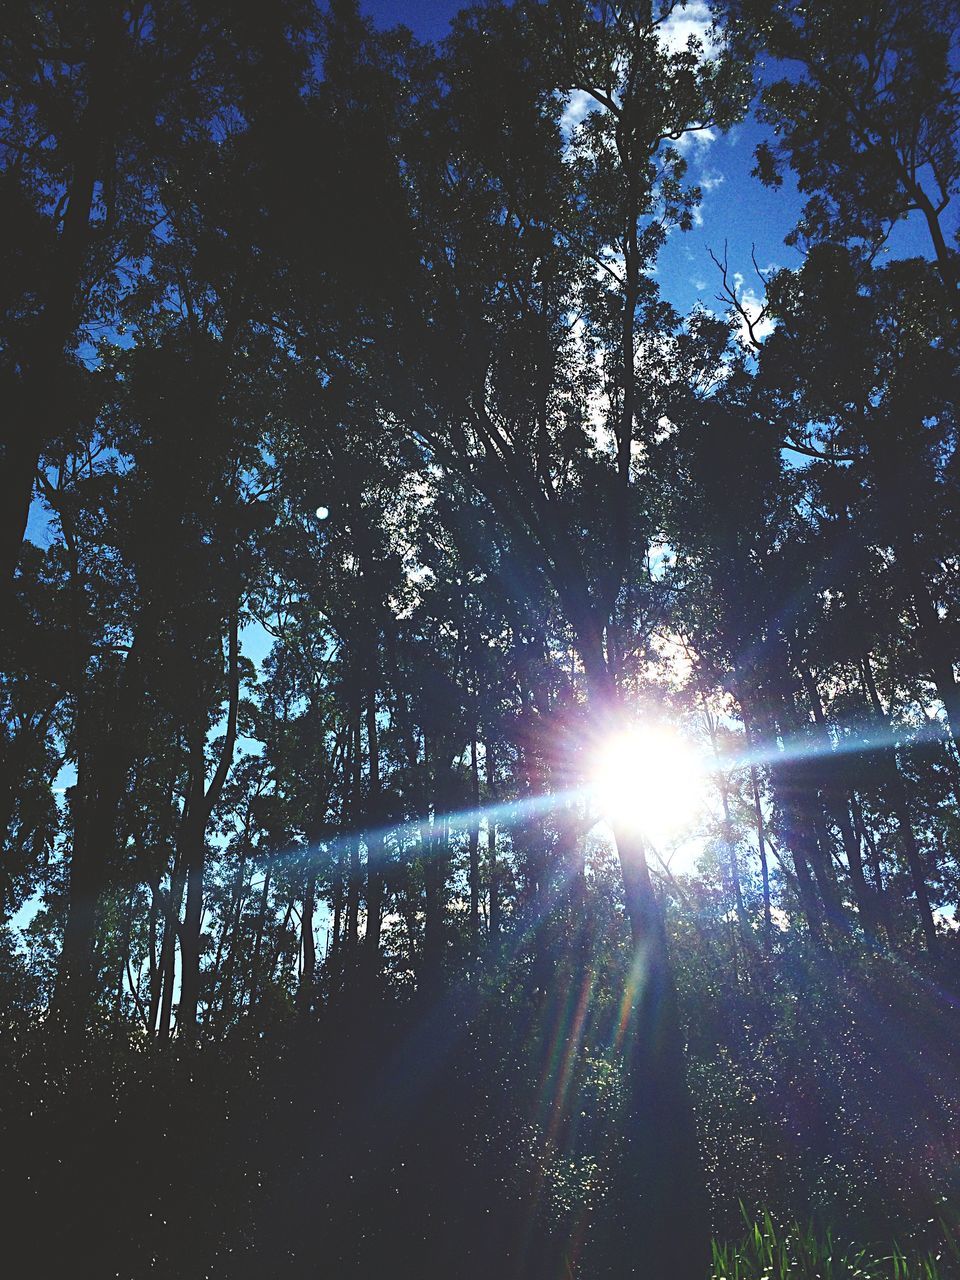 sun, tree, sunbeam, sunlight, lens flare, low angle view, nature, silhouette, tranquility, growth, branch, forest, beauty in nature, back lit, bright, sky, sunny, streaming, outdoors, shiny